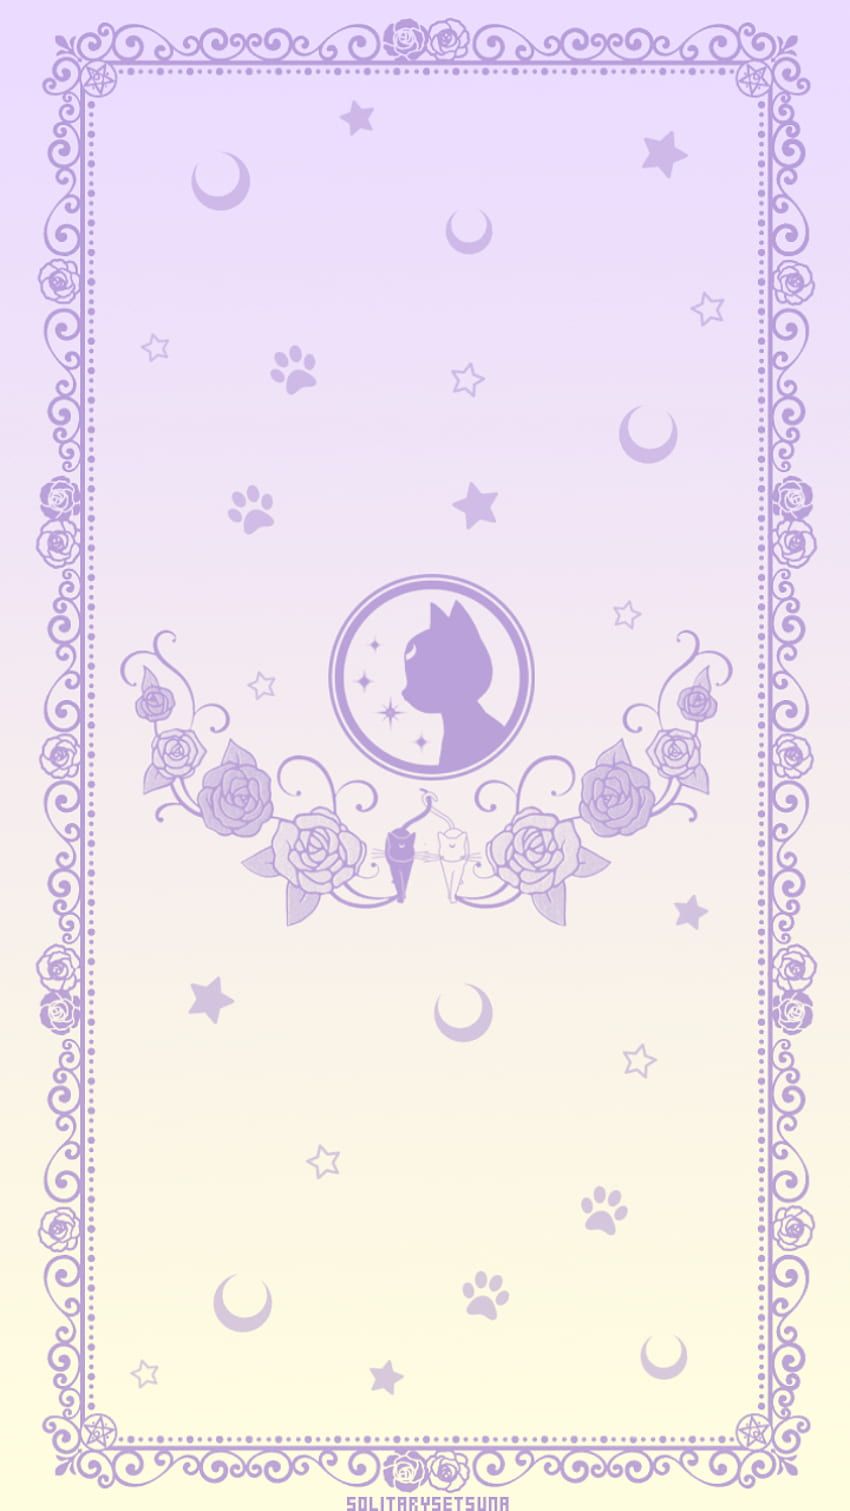 A purple and white background with stars - Artemis